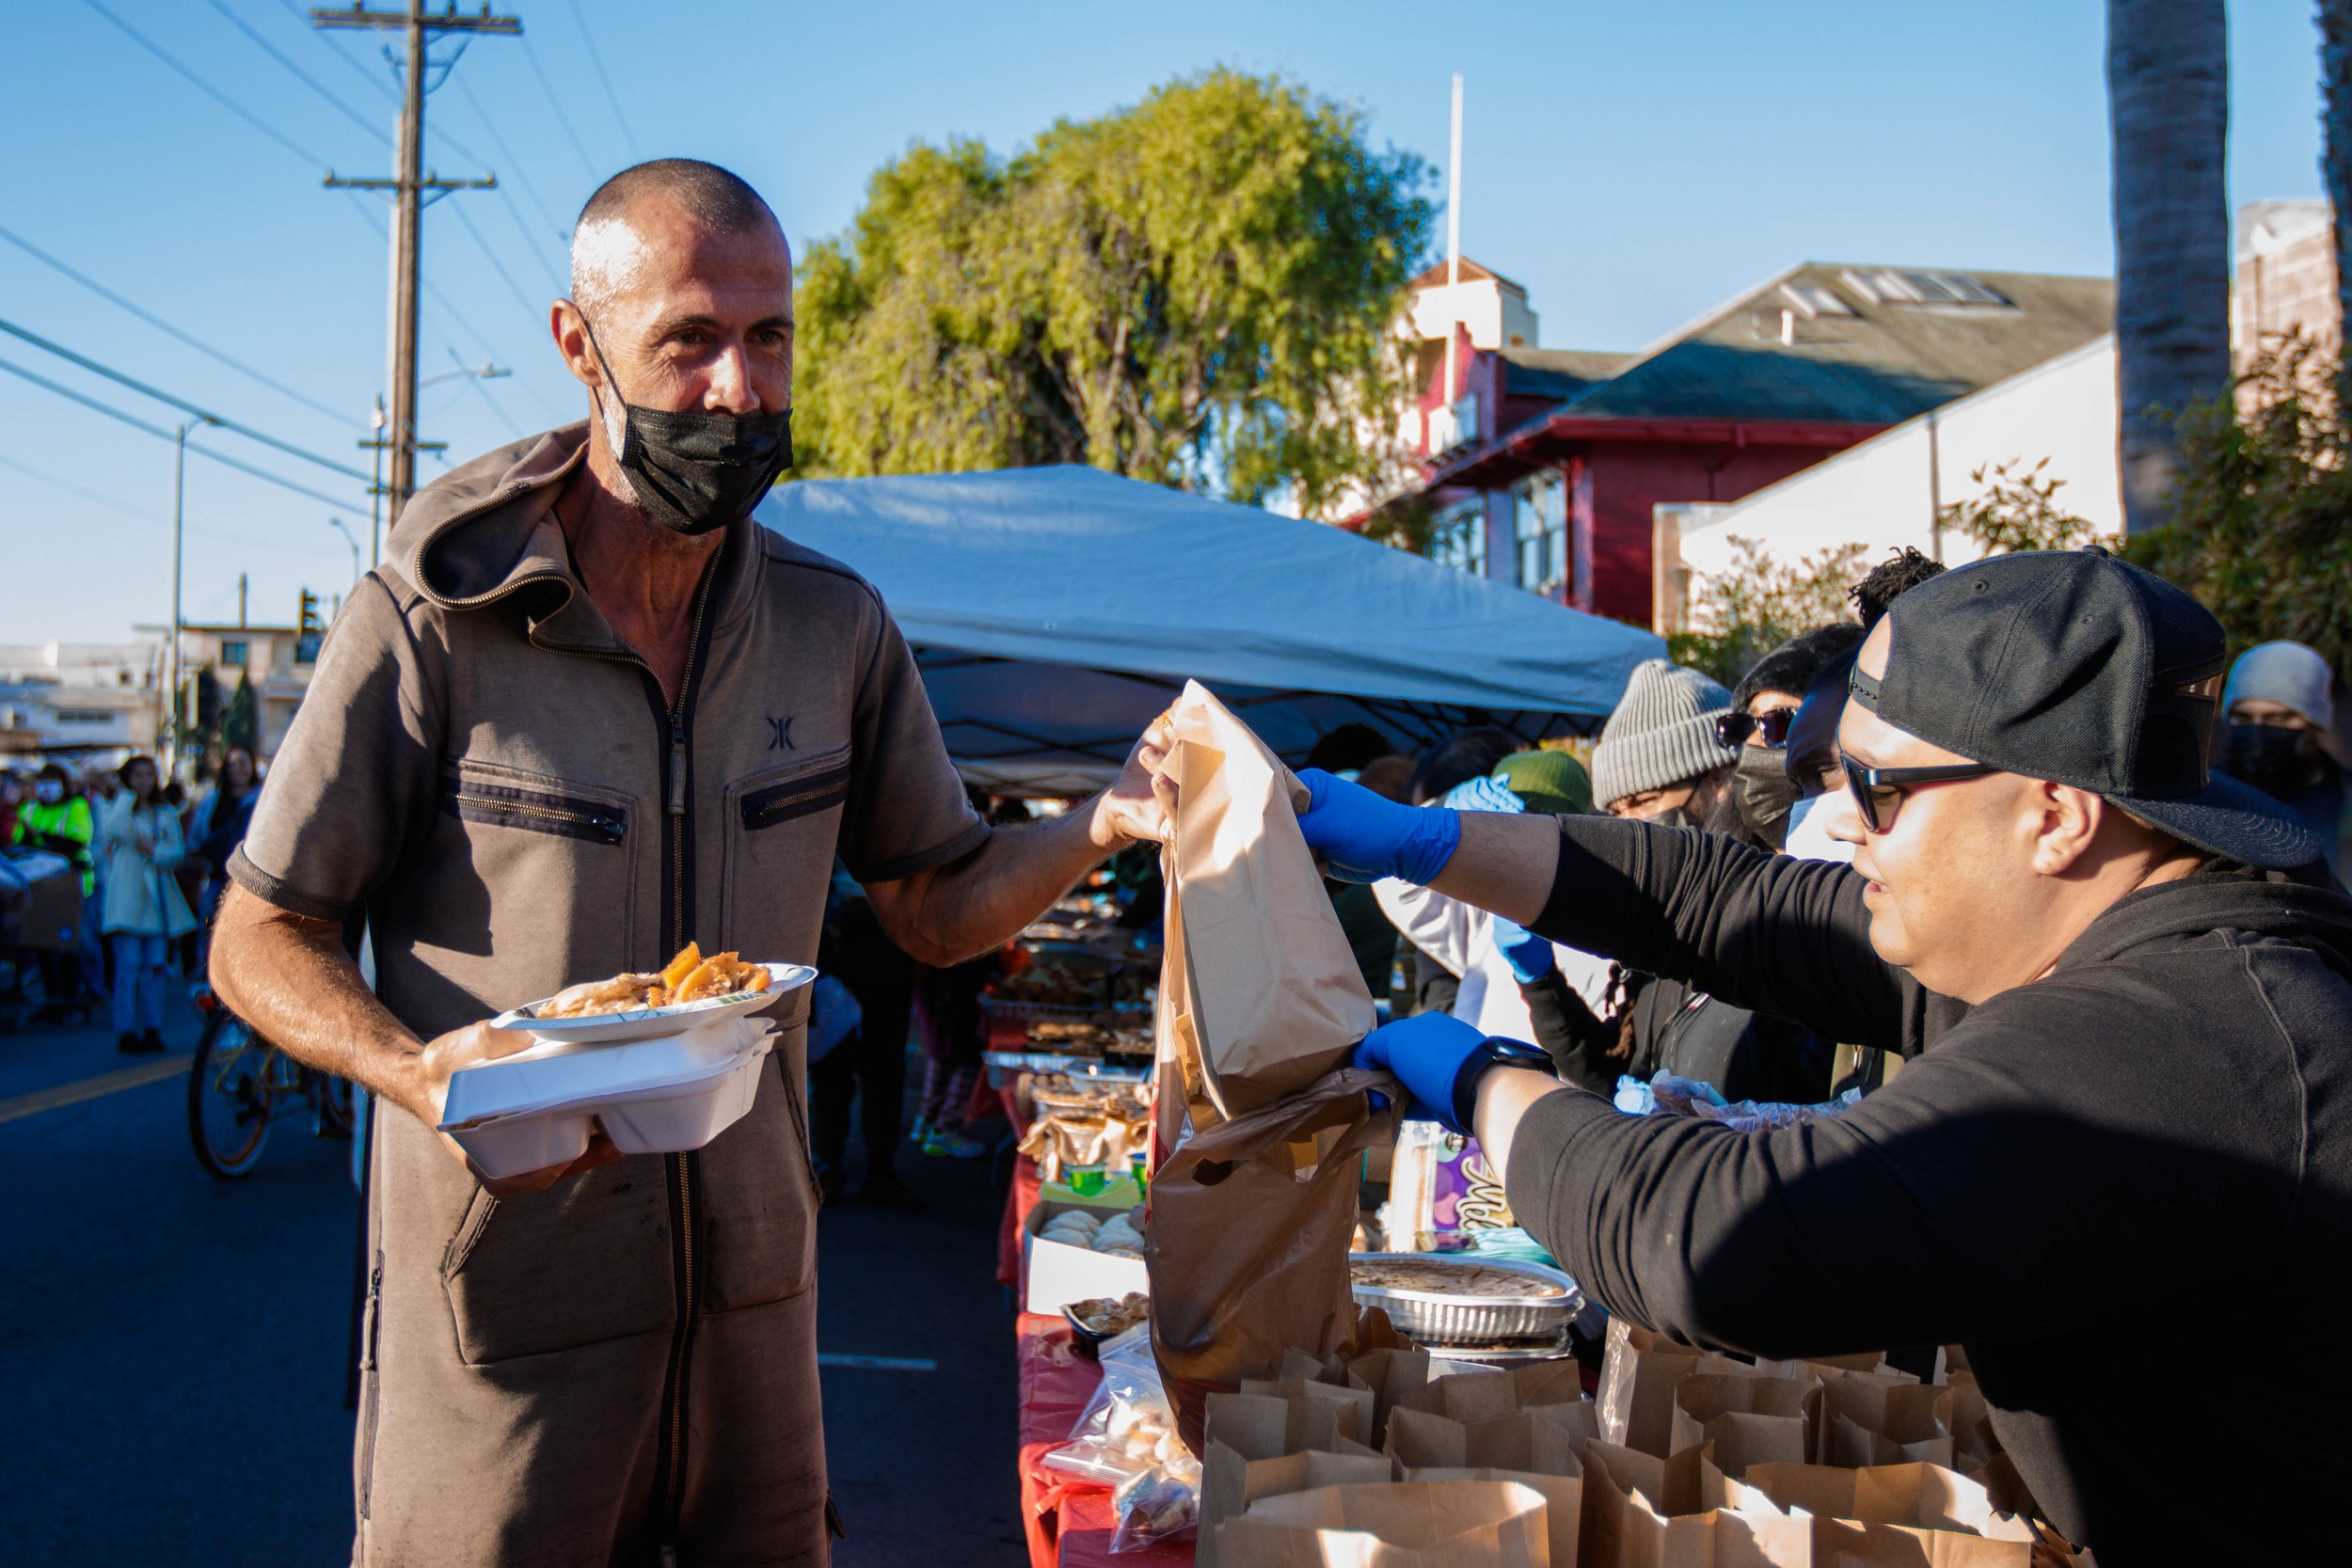  Brent Davis receiving a to-go-snack bag containing fruits and sandwiches at the Lost Angels Org annual Thanksgiving event in Venice. For the past 10 years, Lost Angels Org a non profit based in Los Angeles has been been giving out food and utilities